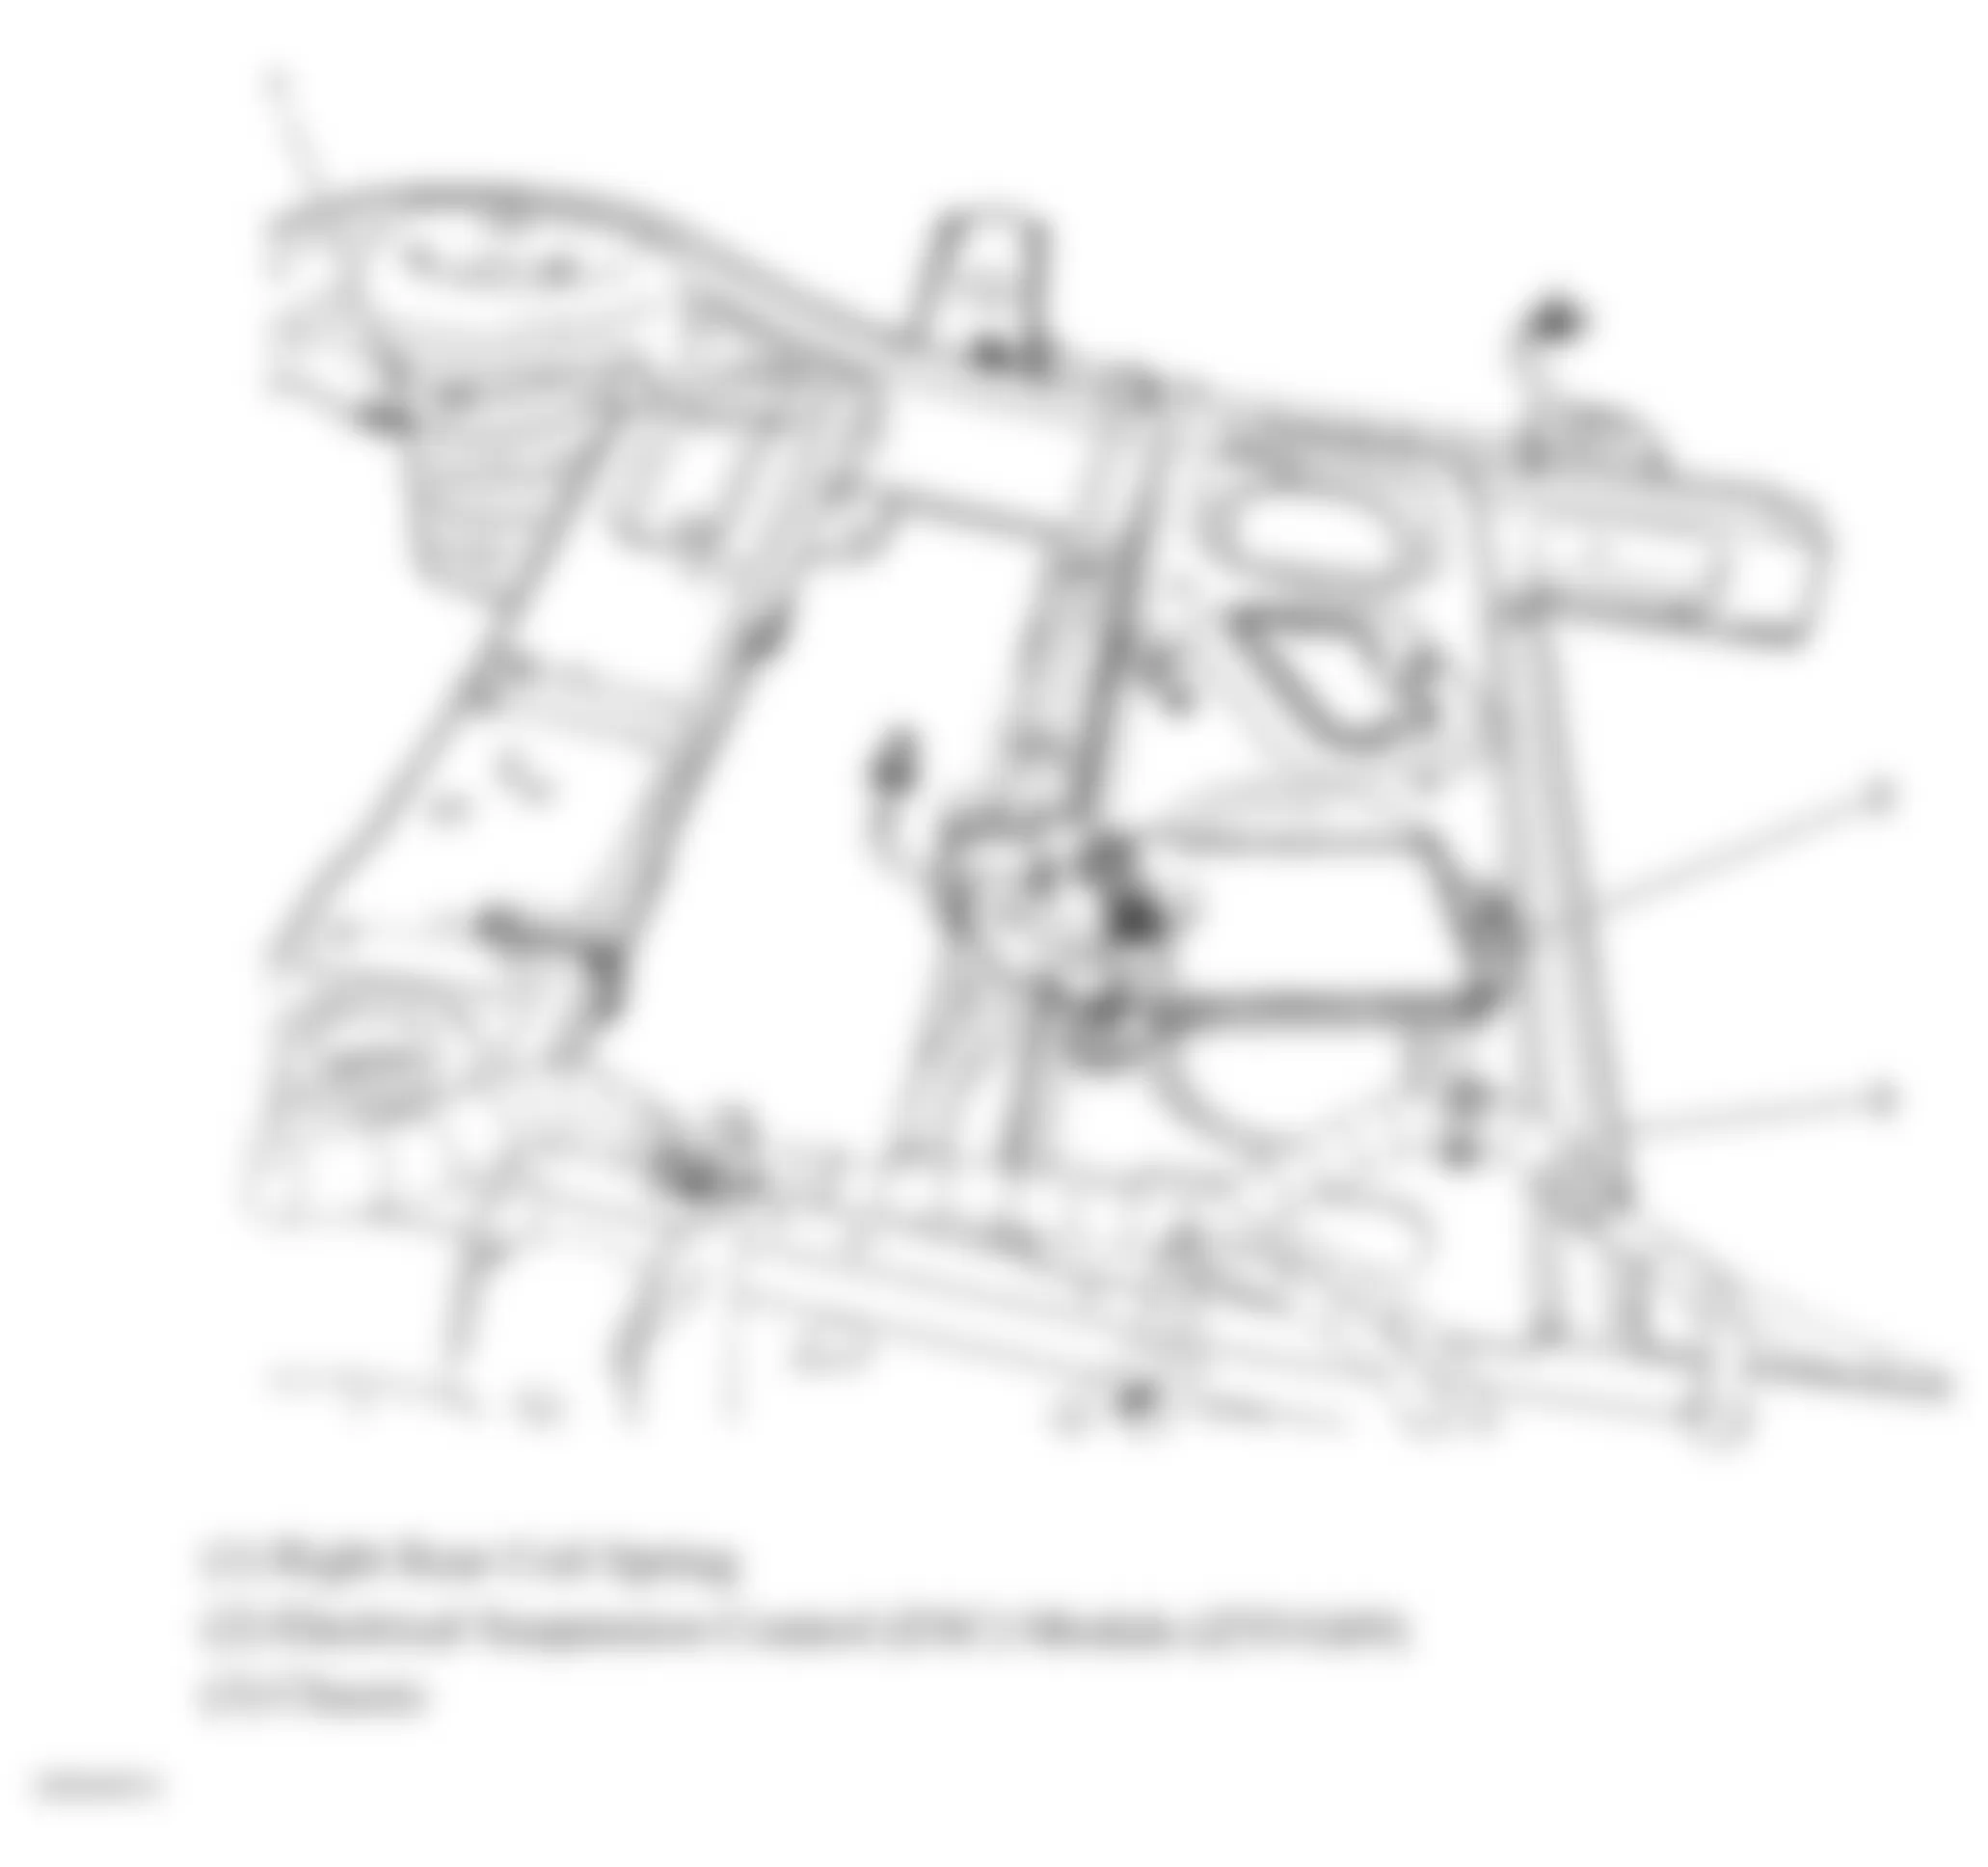 GMC Yukon XL C2500 2008 - Component Locations -  Rear Chassis